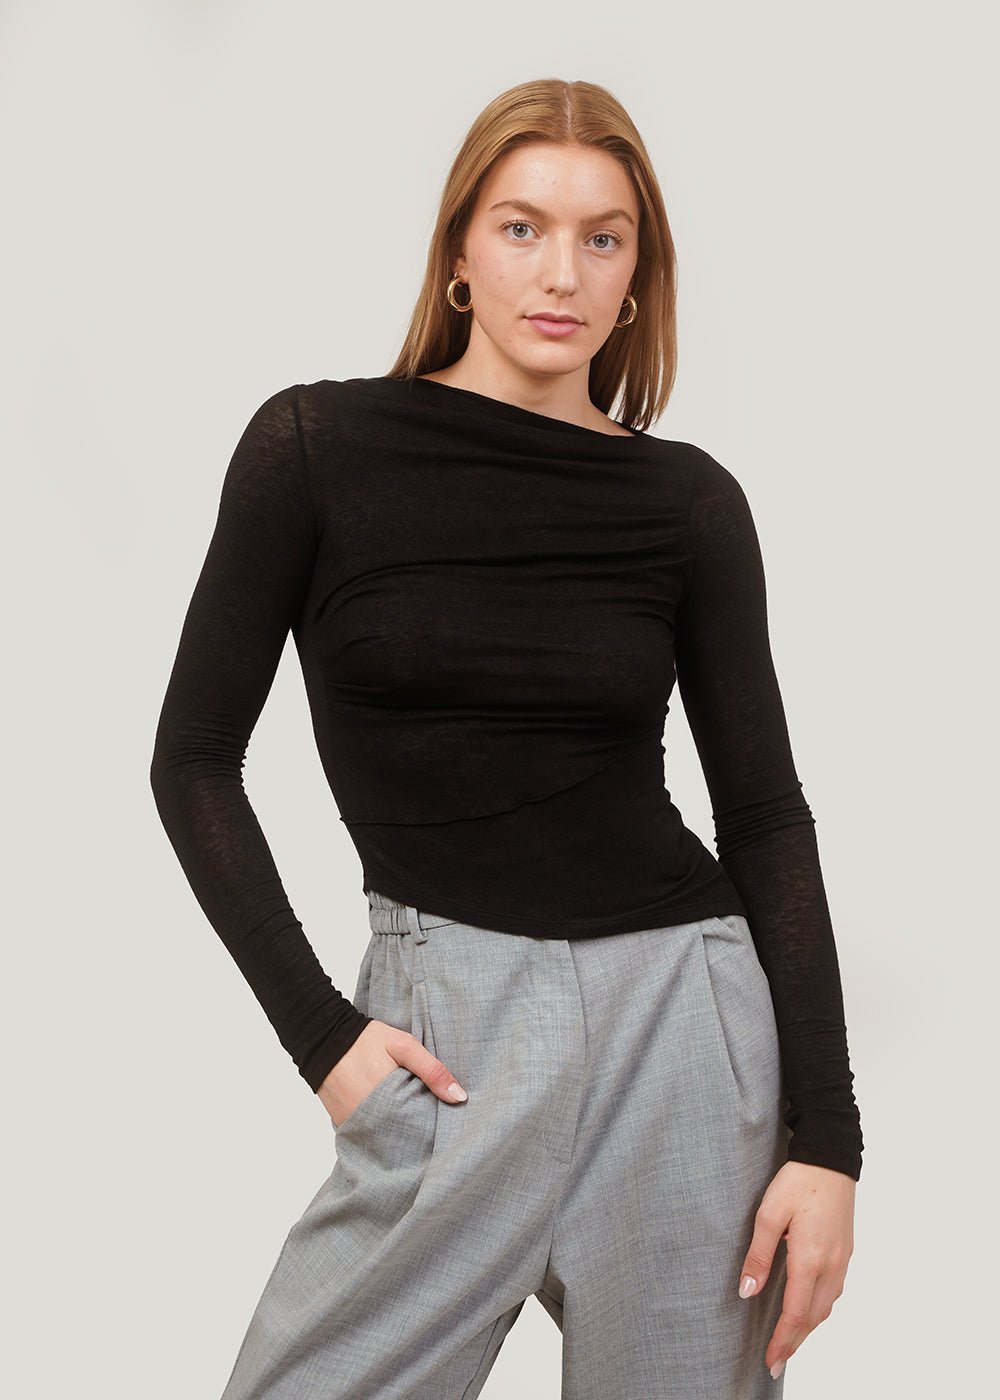 Geel Black Drew Top - New Classics Studios Sustainable Ethical Fashion Canada